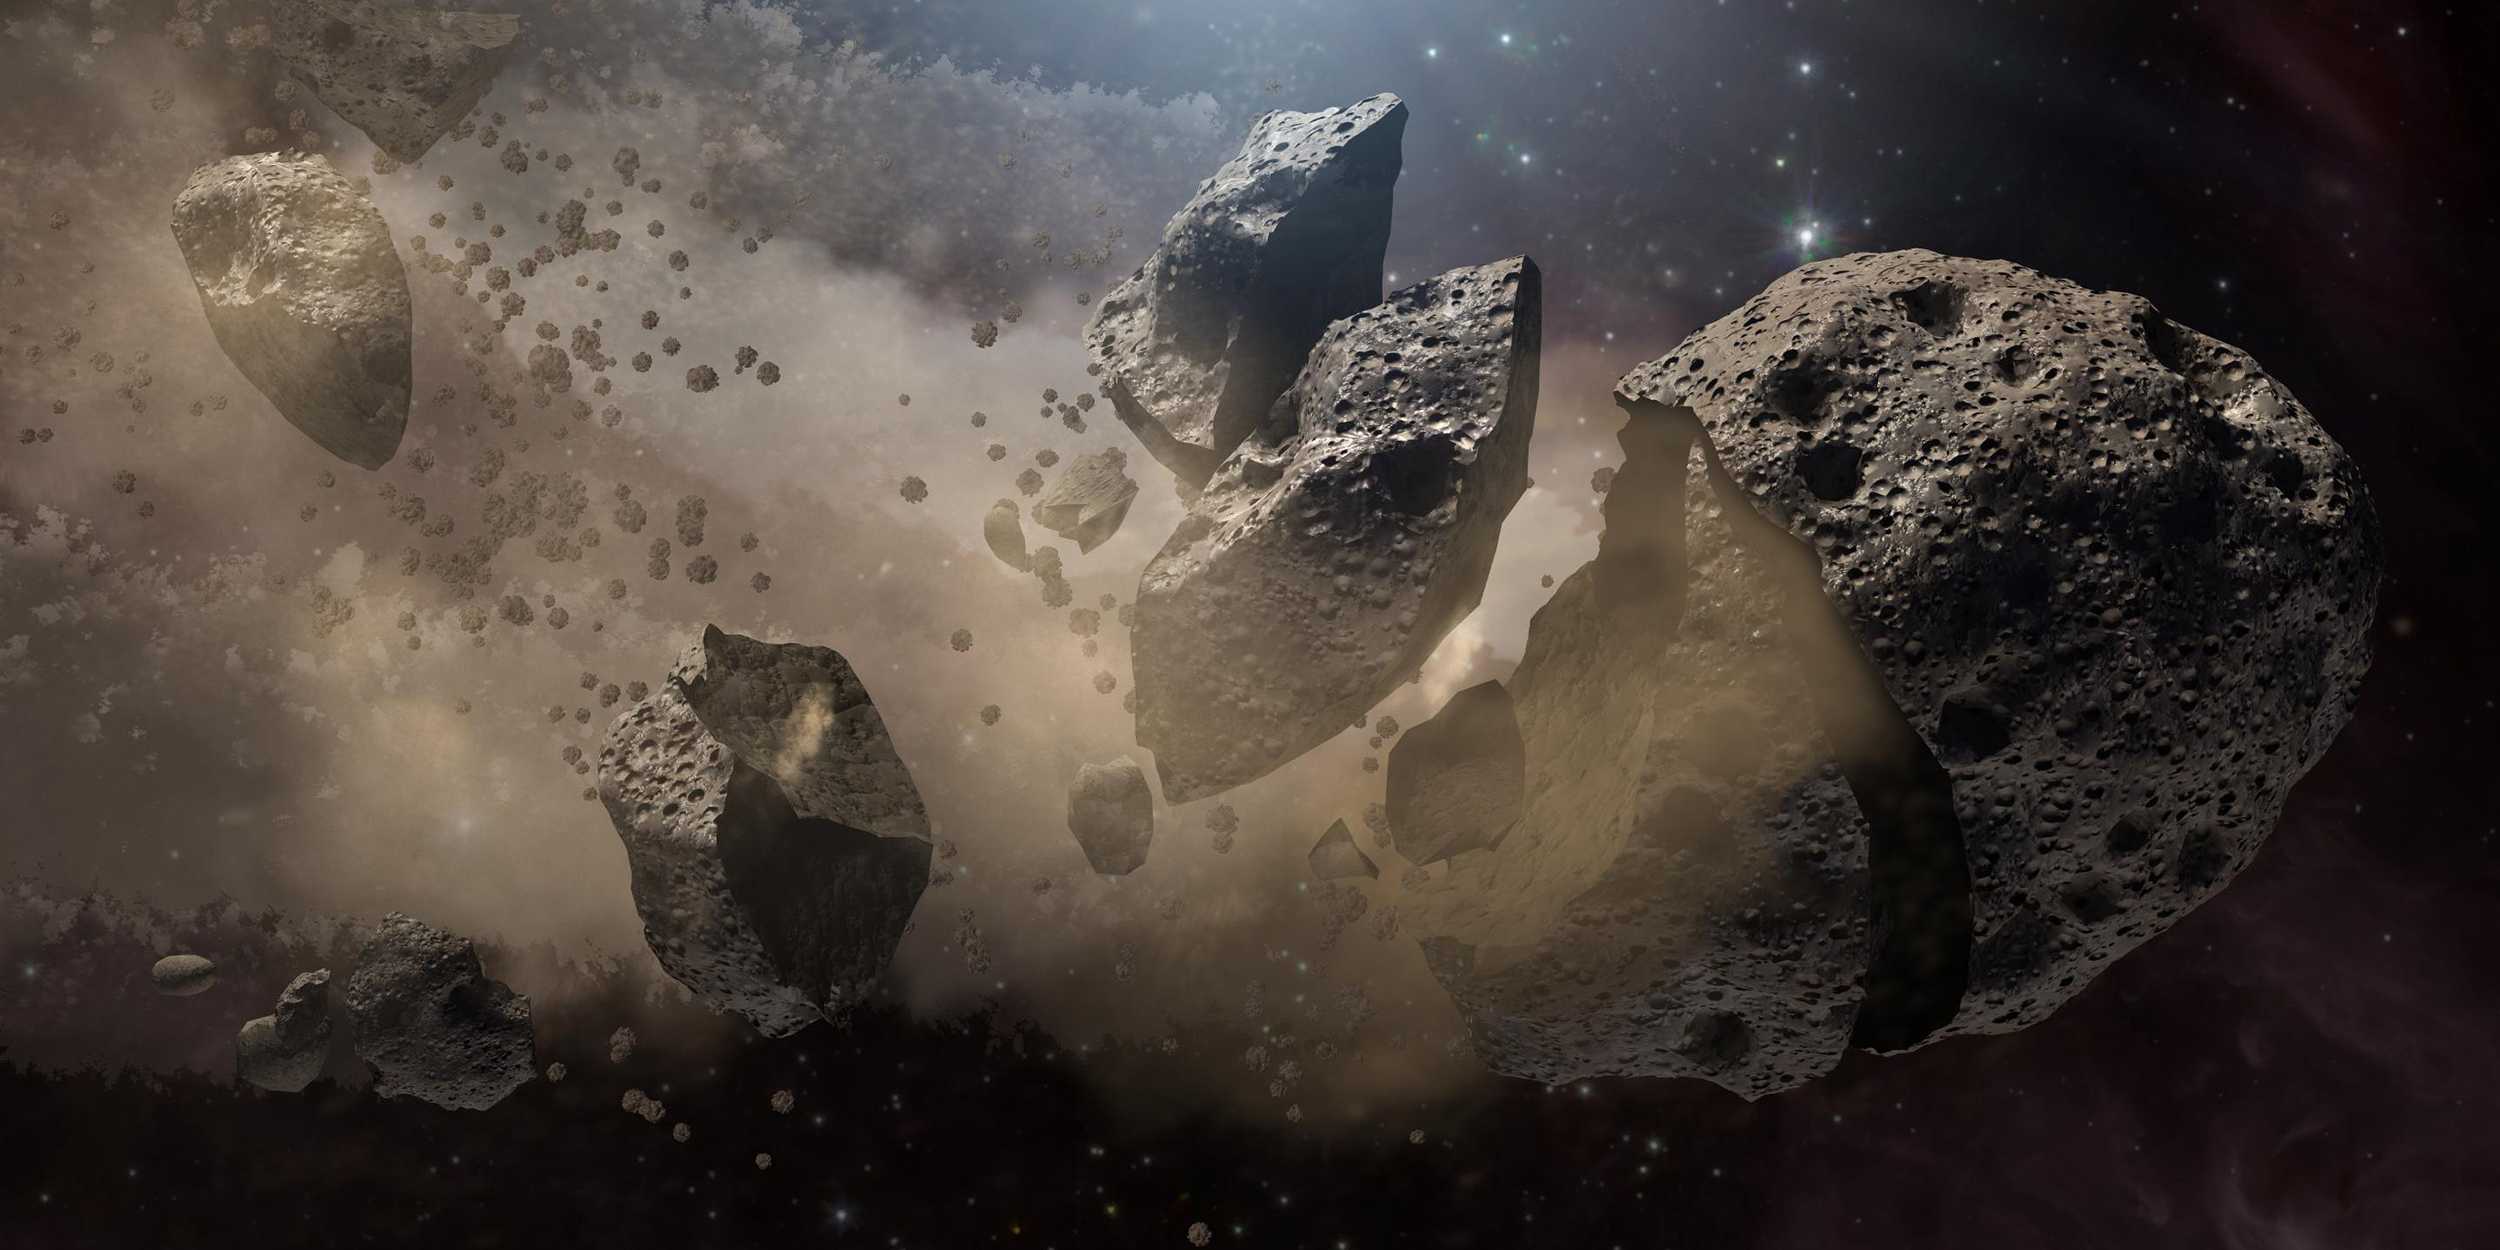 An asteroid is breaking up, producing a lot of dust, which reaches the Earth eventually